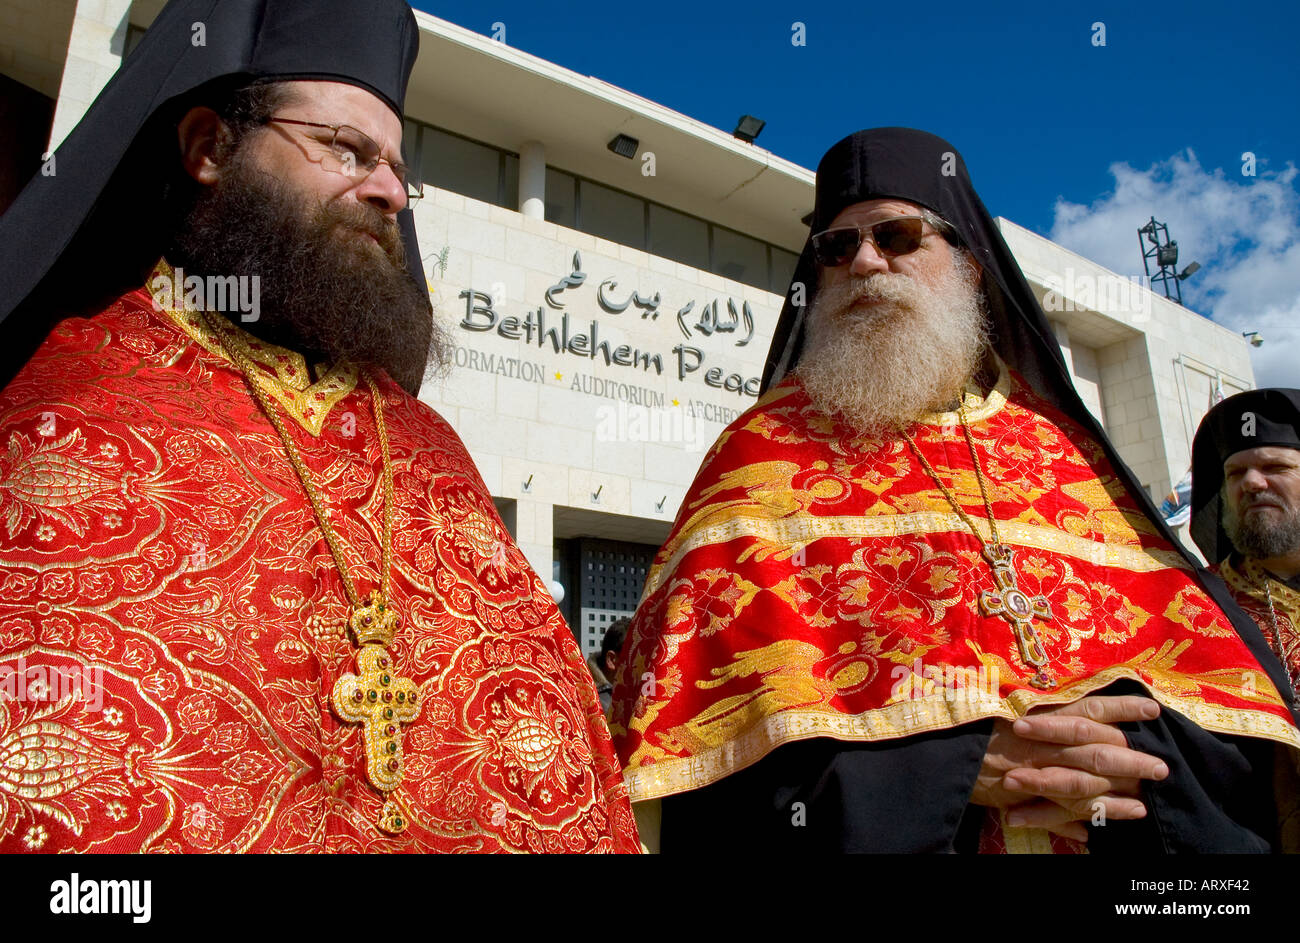 Palestinian Authority Bethlehem church of the Nativity Orthodox Xmas Procession outside the the church portrait of 2 priests in religious dress Stock Photo